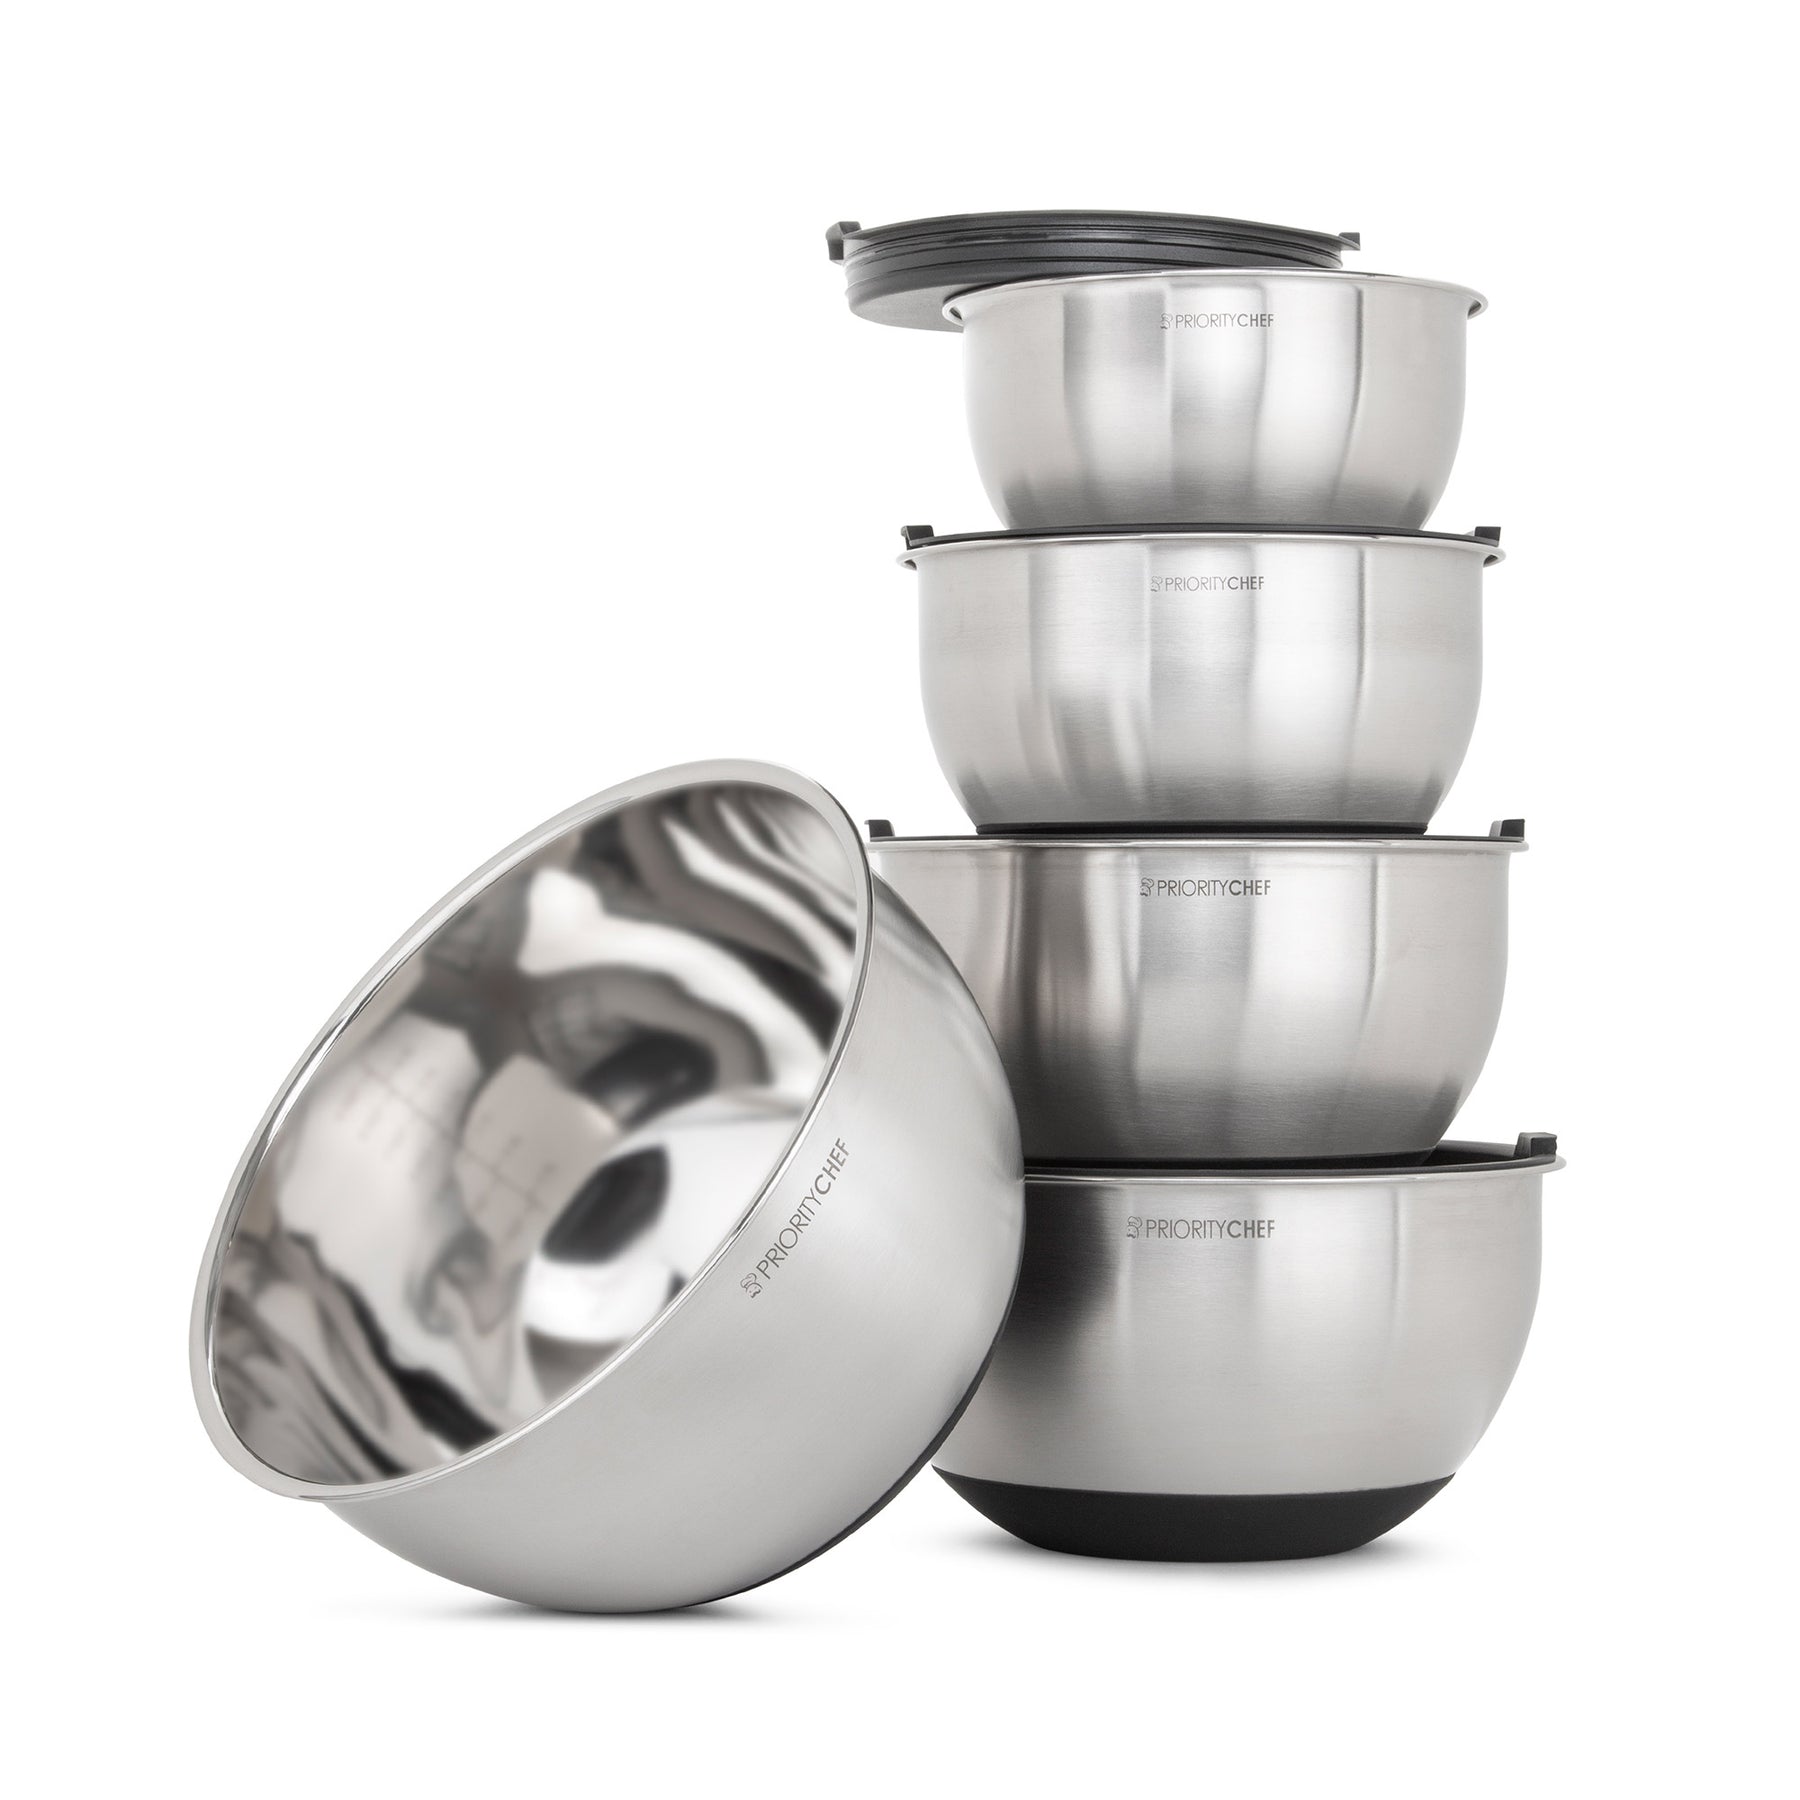 PriorityChef 5 Piece Mixing Bowls with Lids, Large 5 Quart Capacity, Stainless